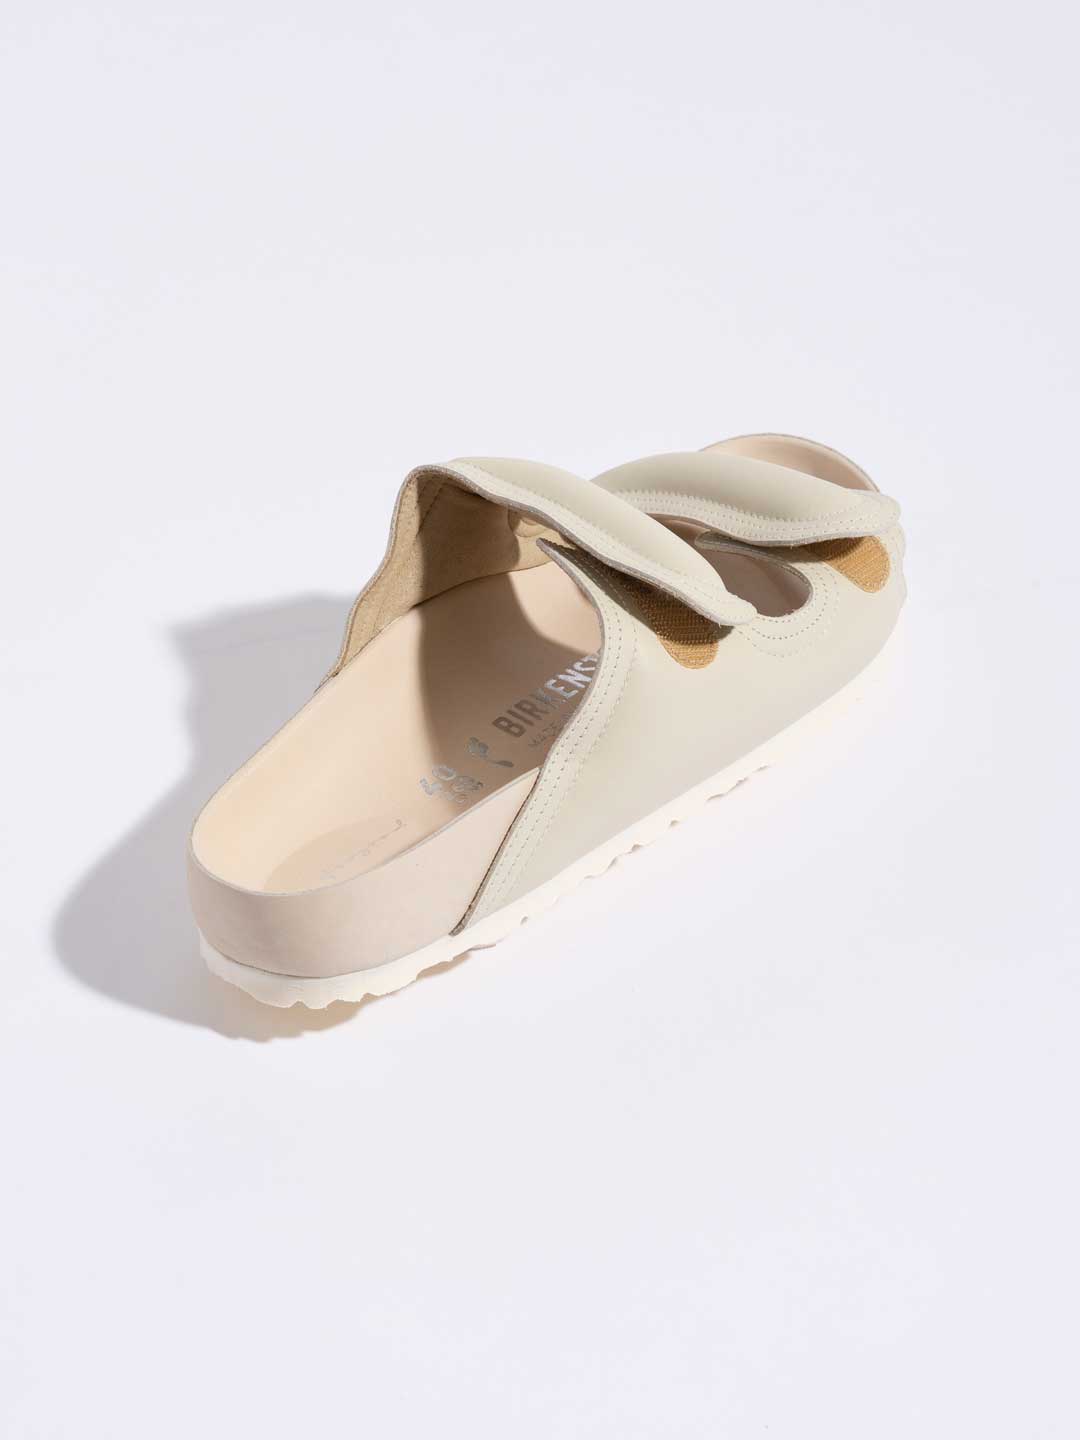 The Beach Comber Leather Sandals - Cream